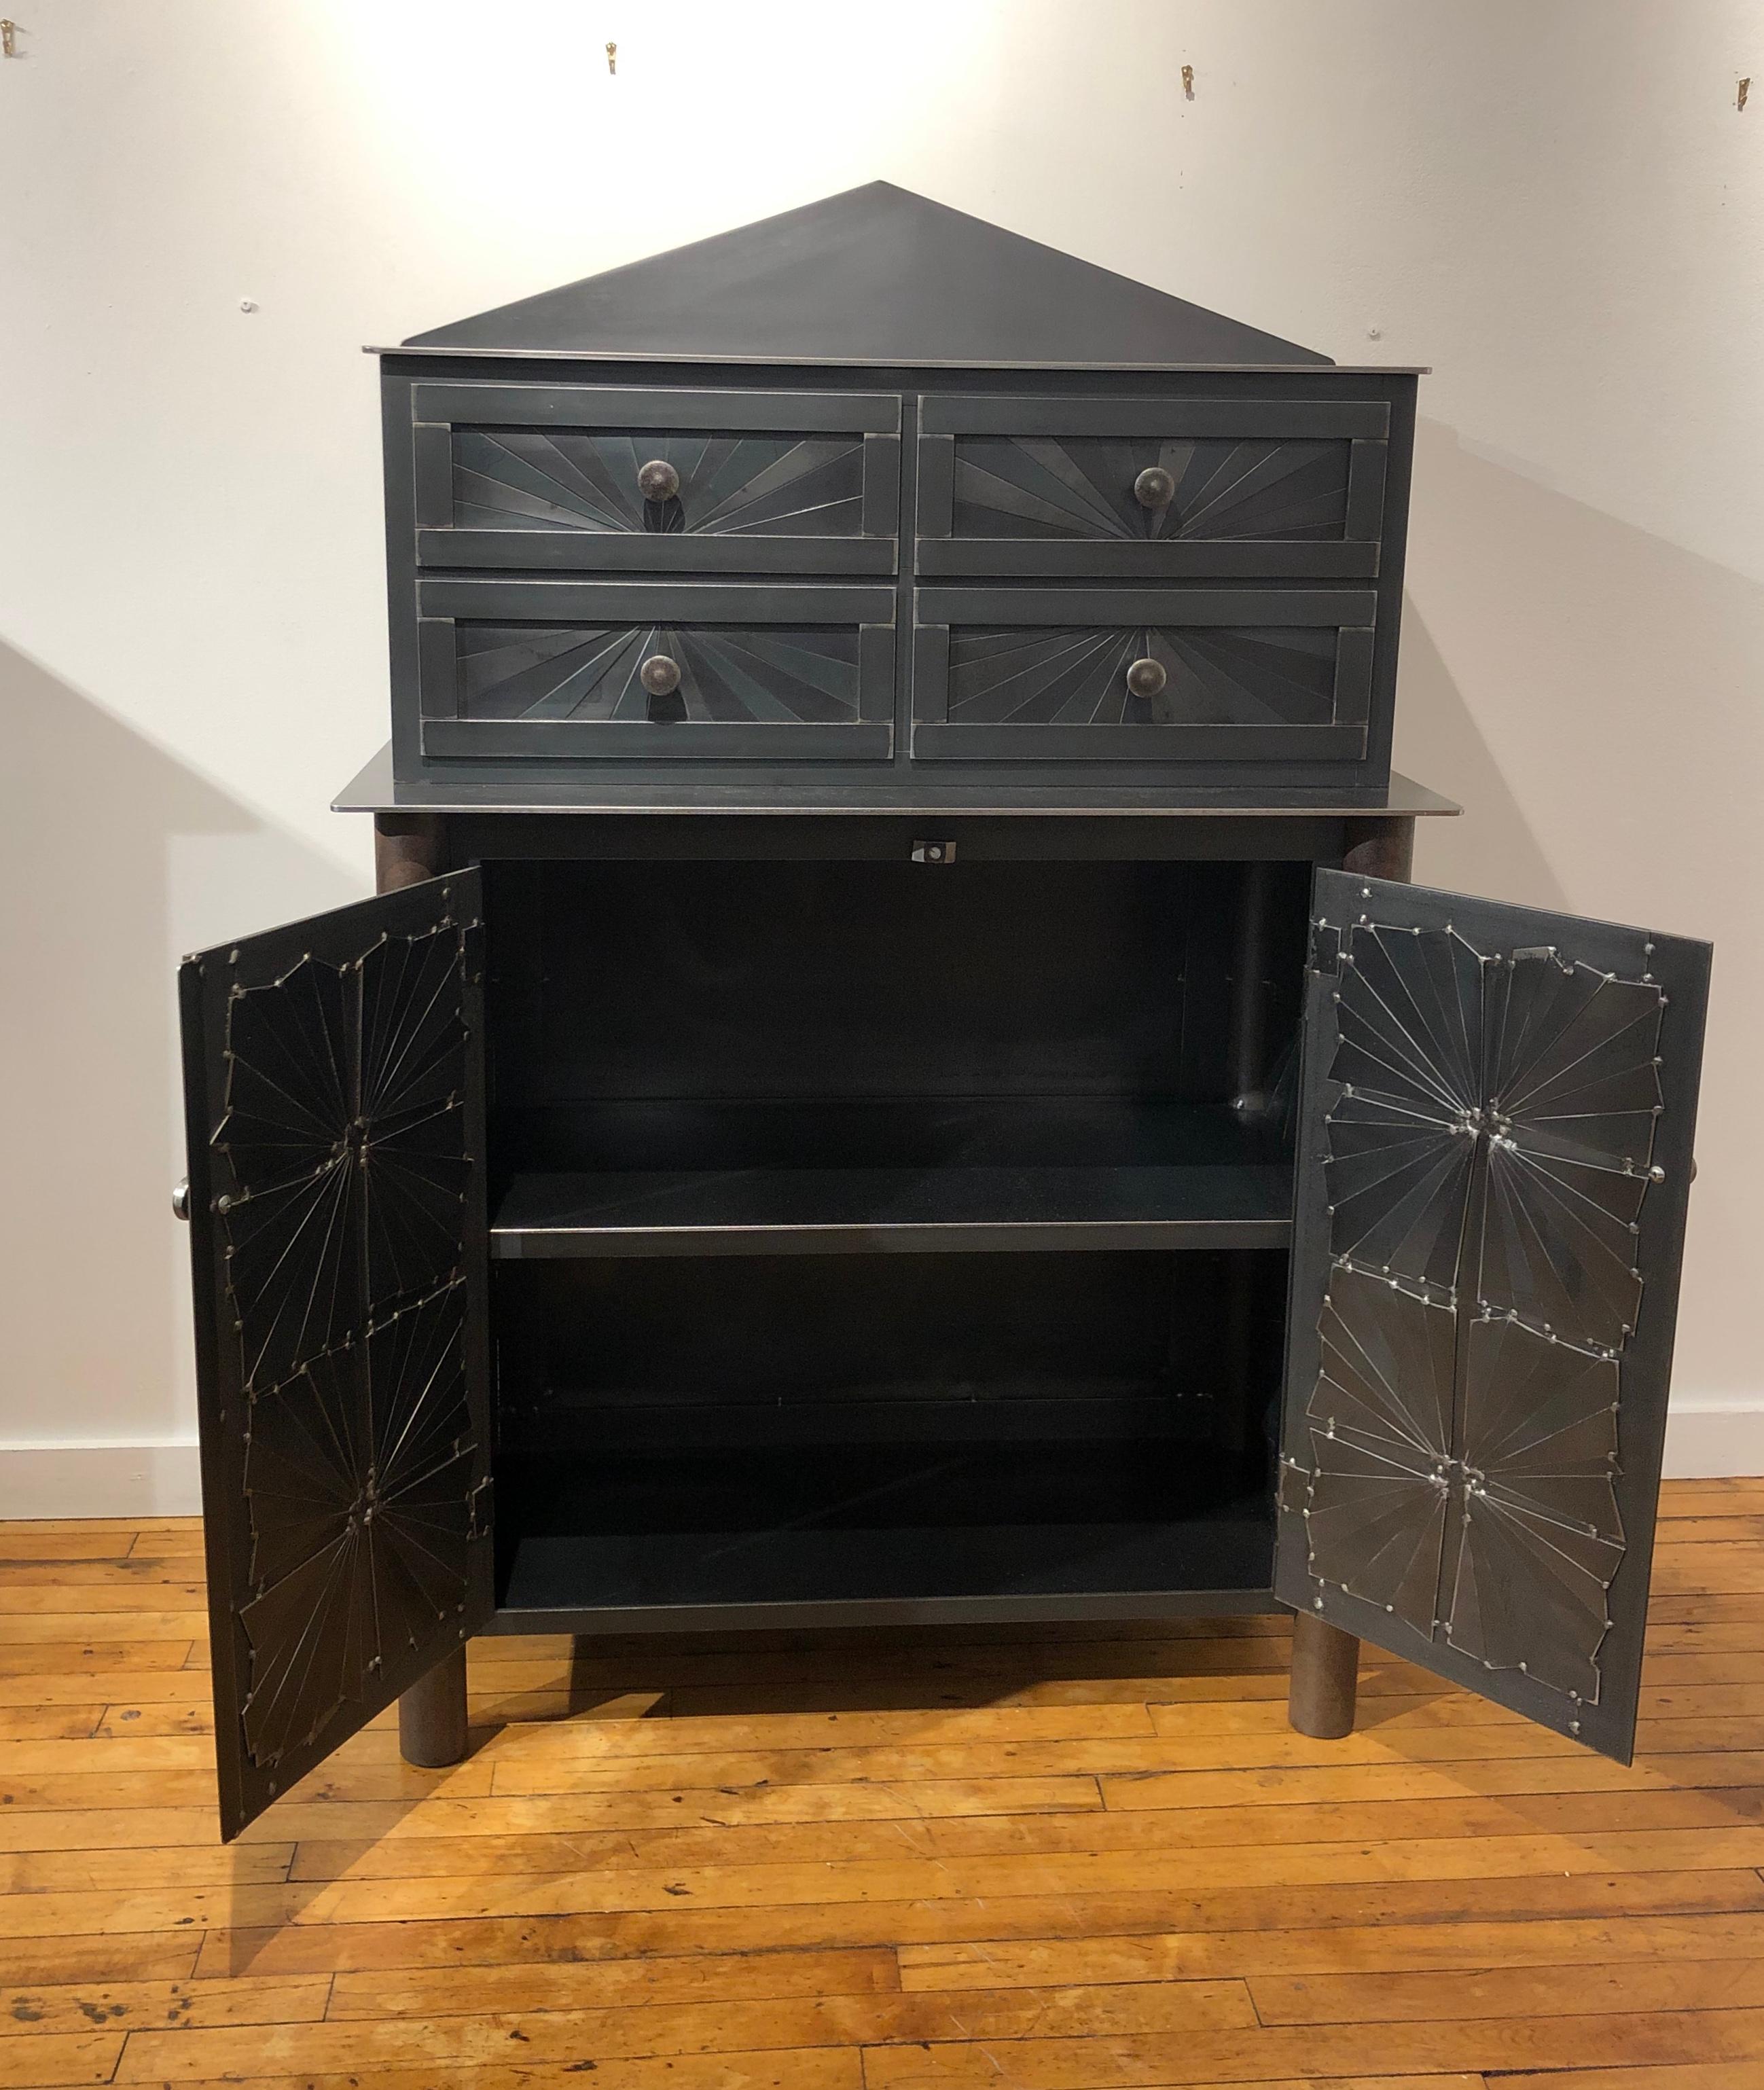 Welded Jim Rose Starburst Pattern Cupboard with Chest of Drawers, Steel Art Furniture